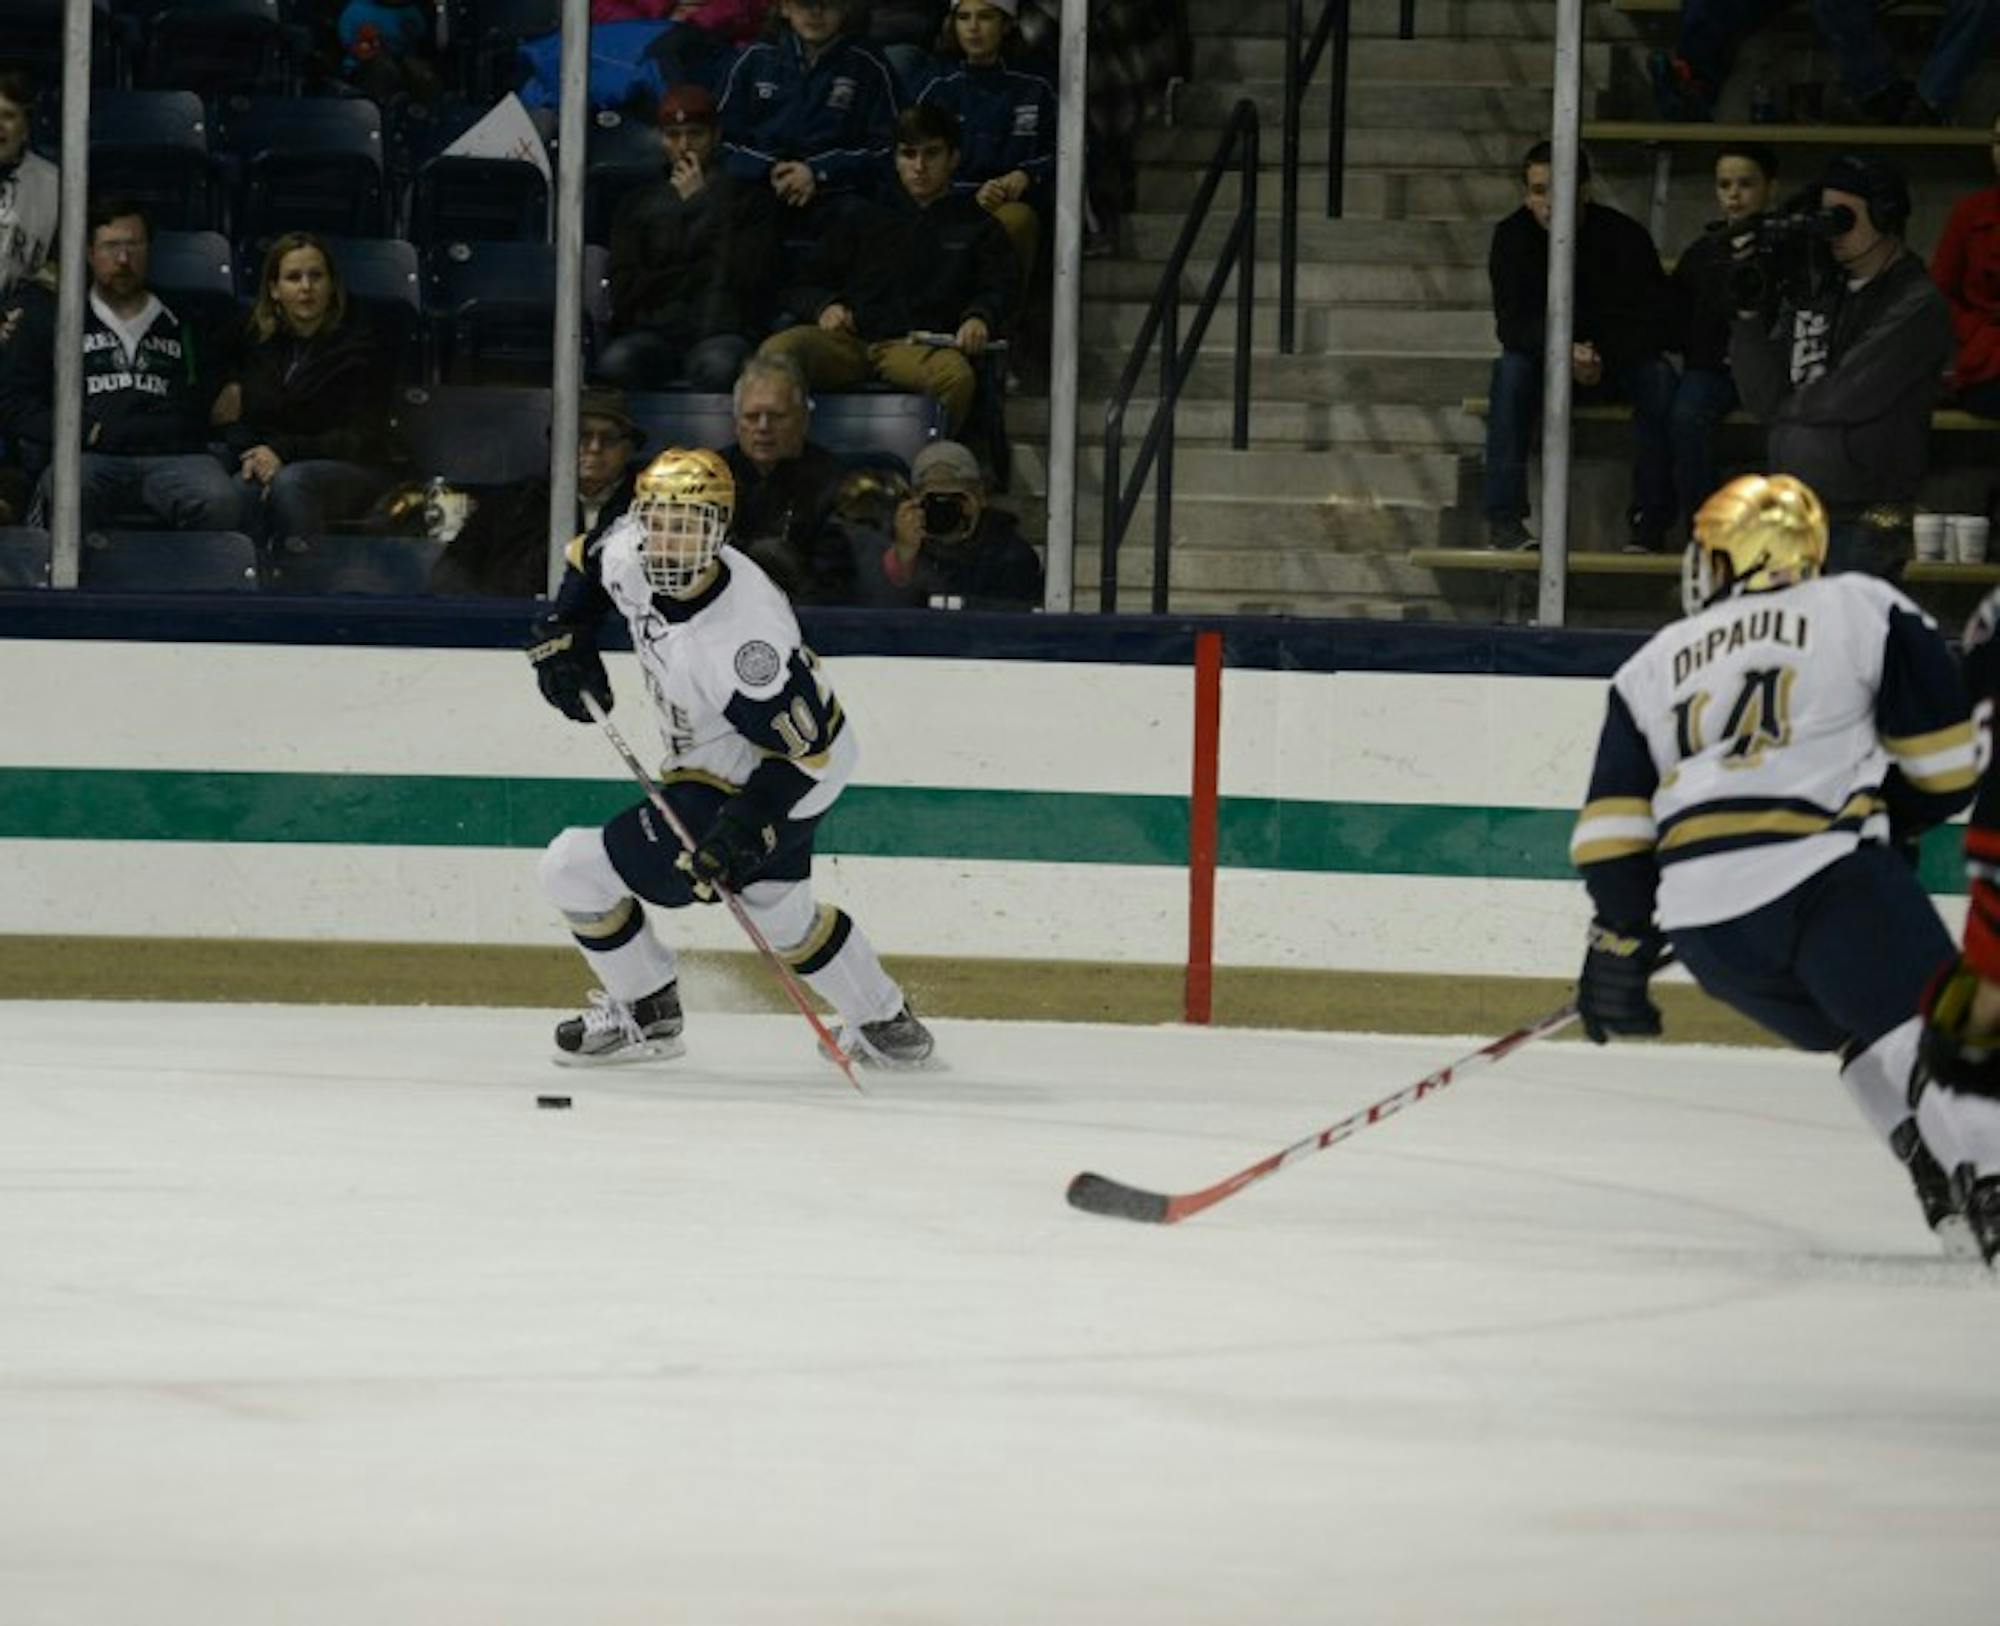 Irish sophomore left wing Anders Bjork looks to pass the puck during Notre Dame’s 3-2 win over Northeastern on Nov. 12.